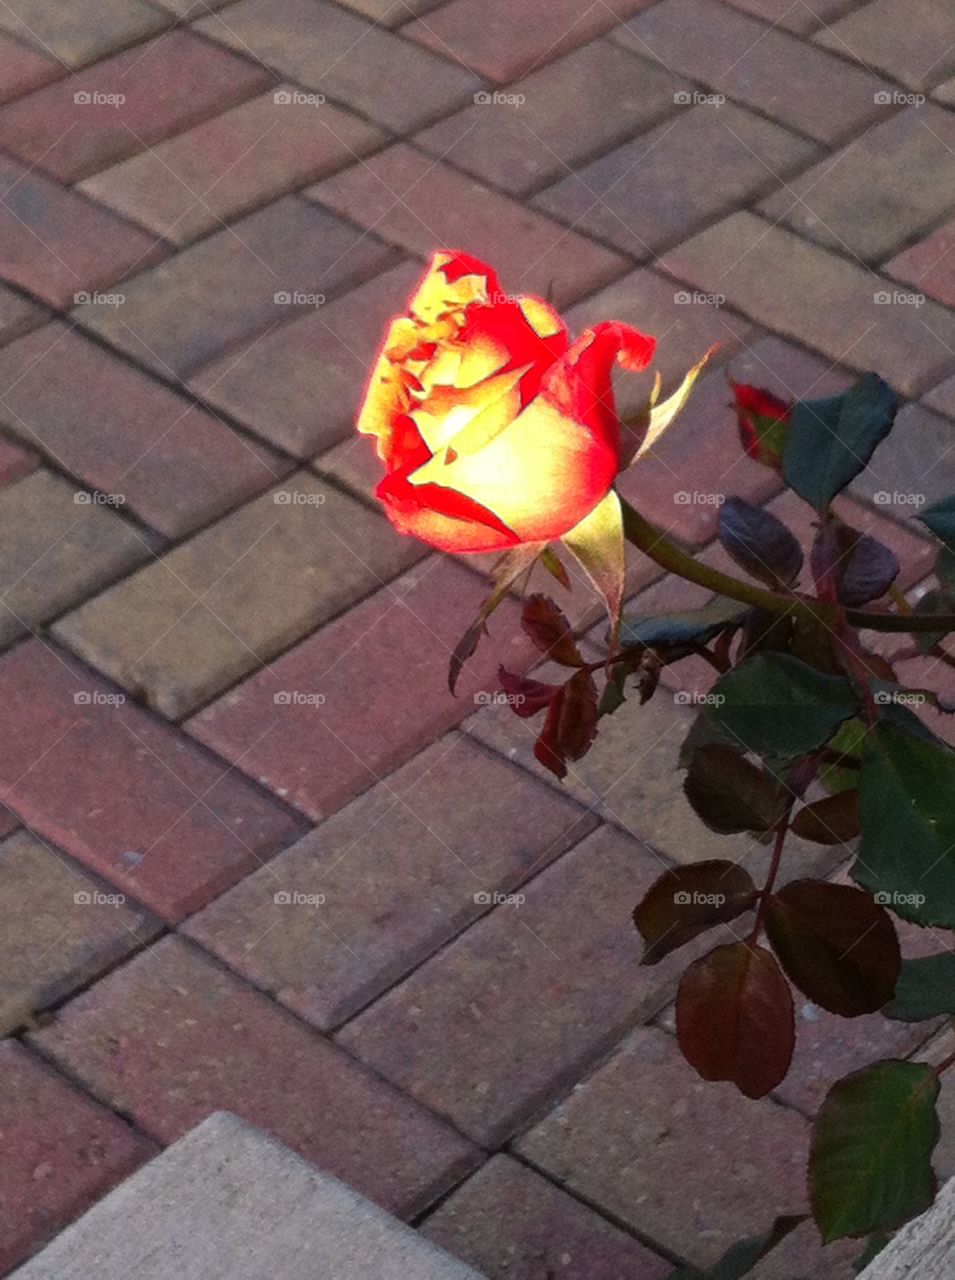 Sunrise rose. The sun reflecting off of my red roses